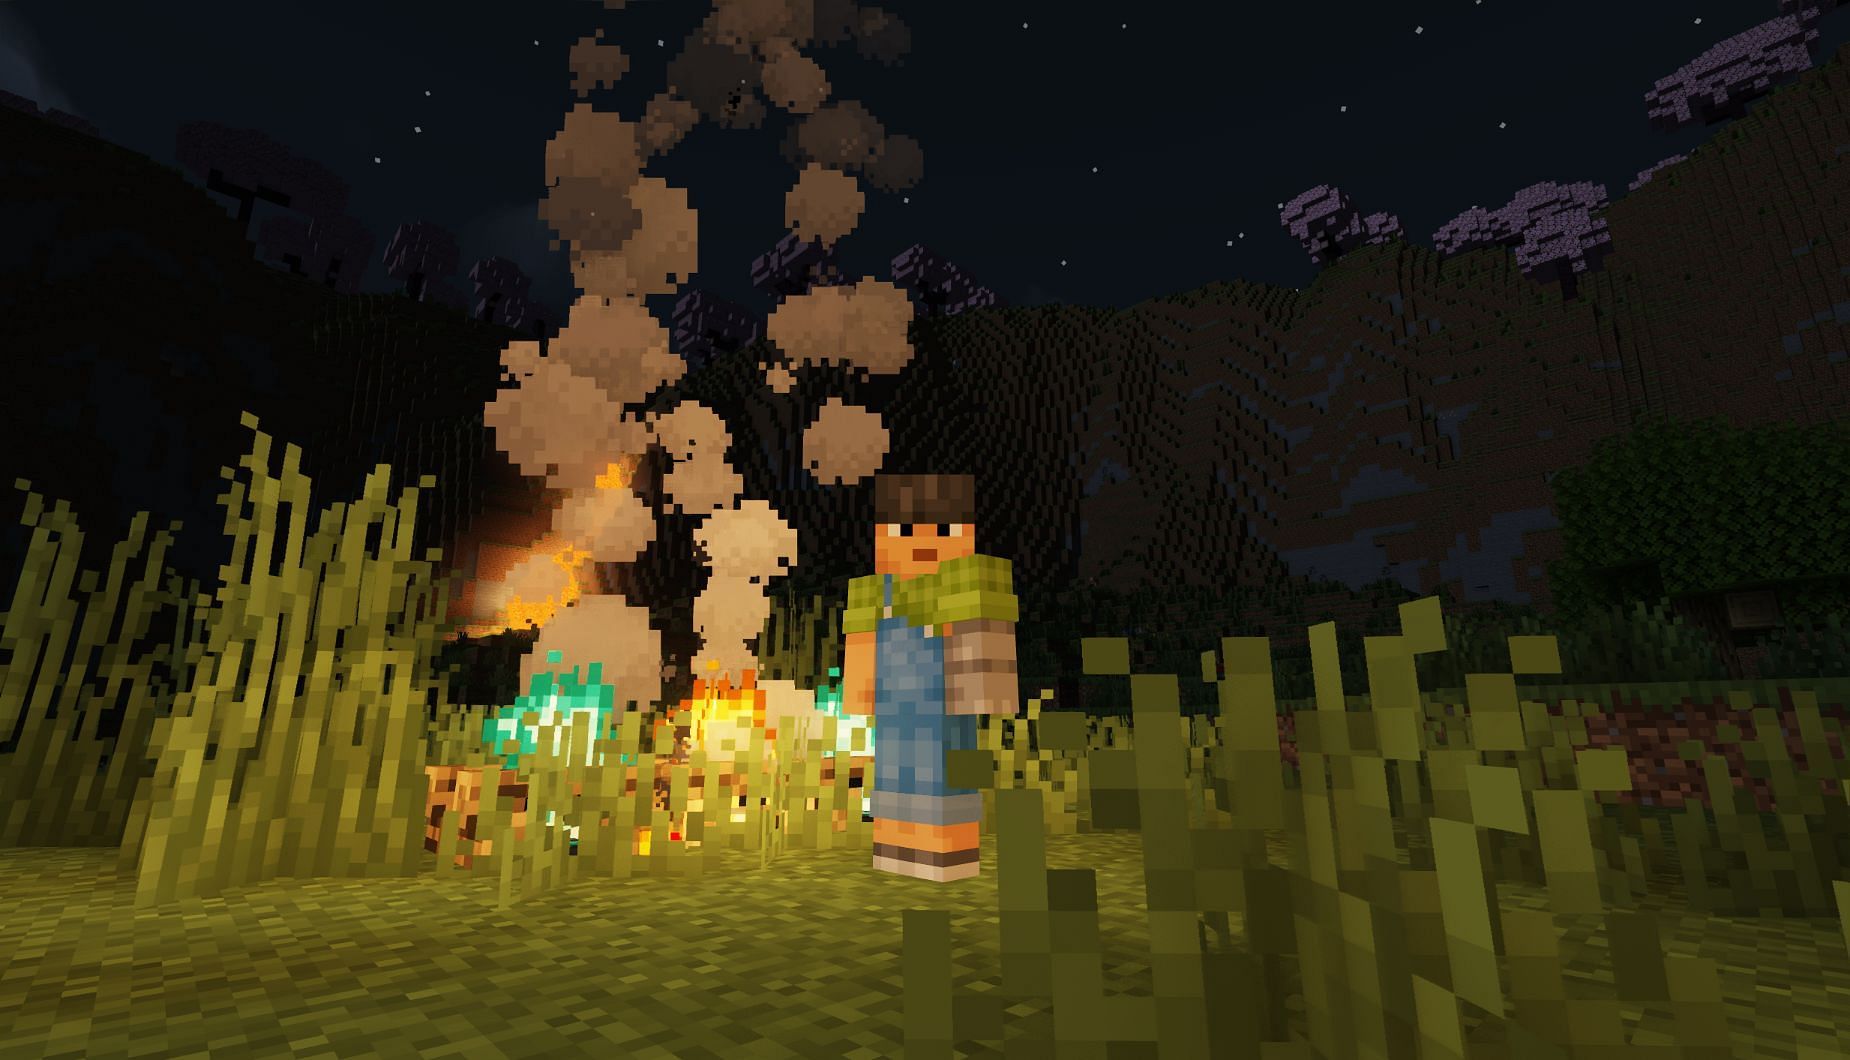 7 interesting facts about fire in Minecraft (Image via Mojang)